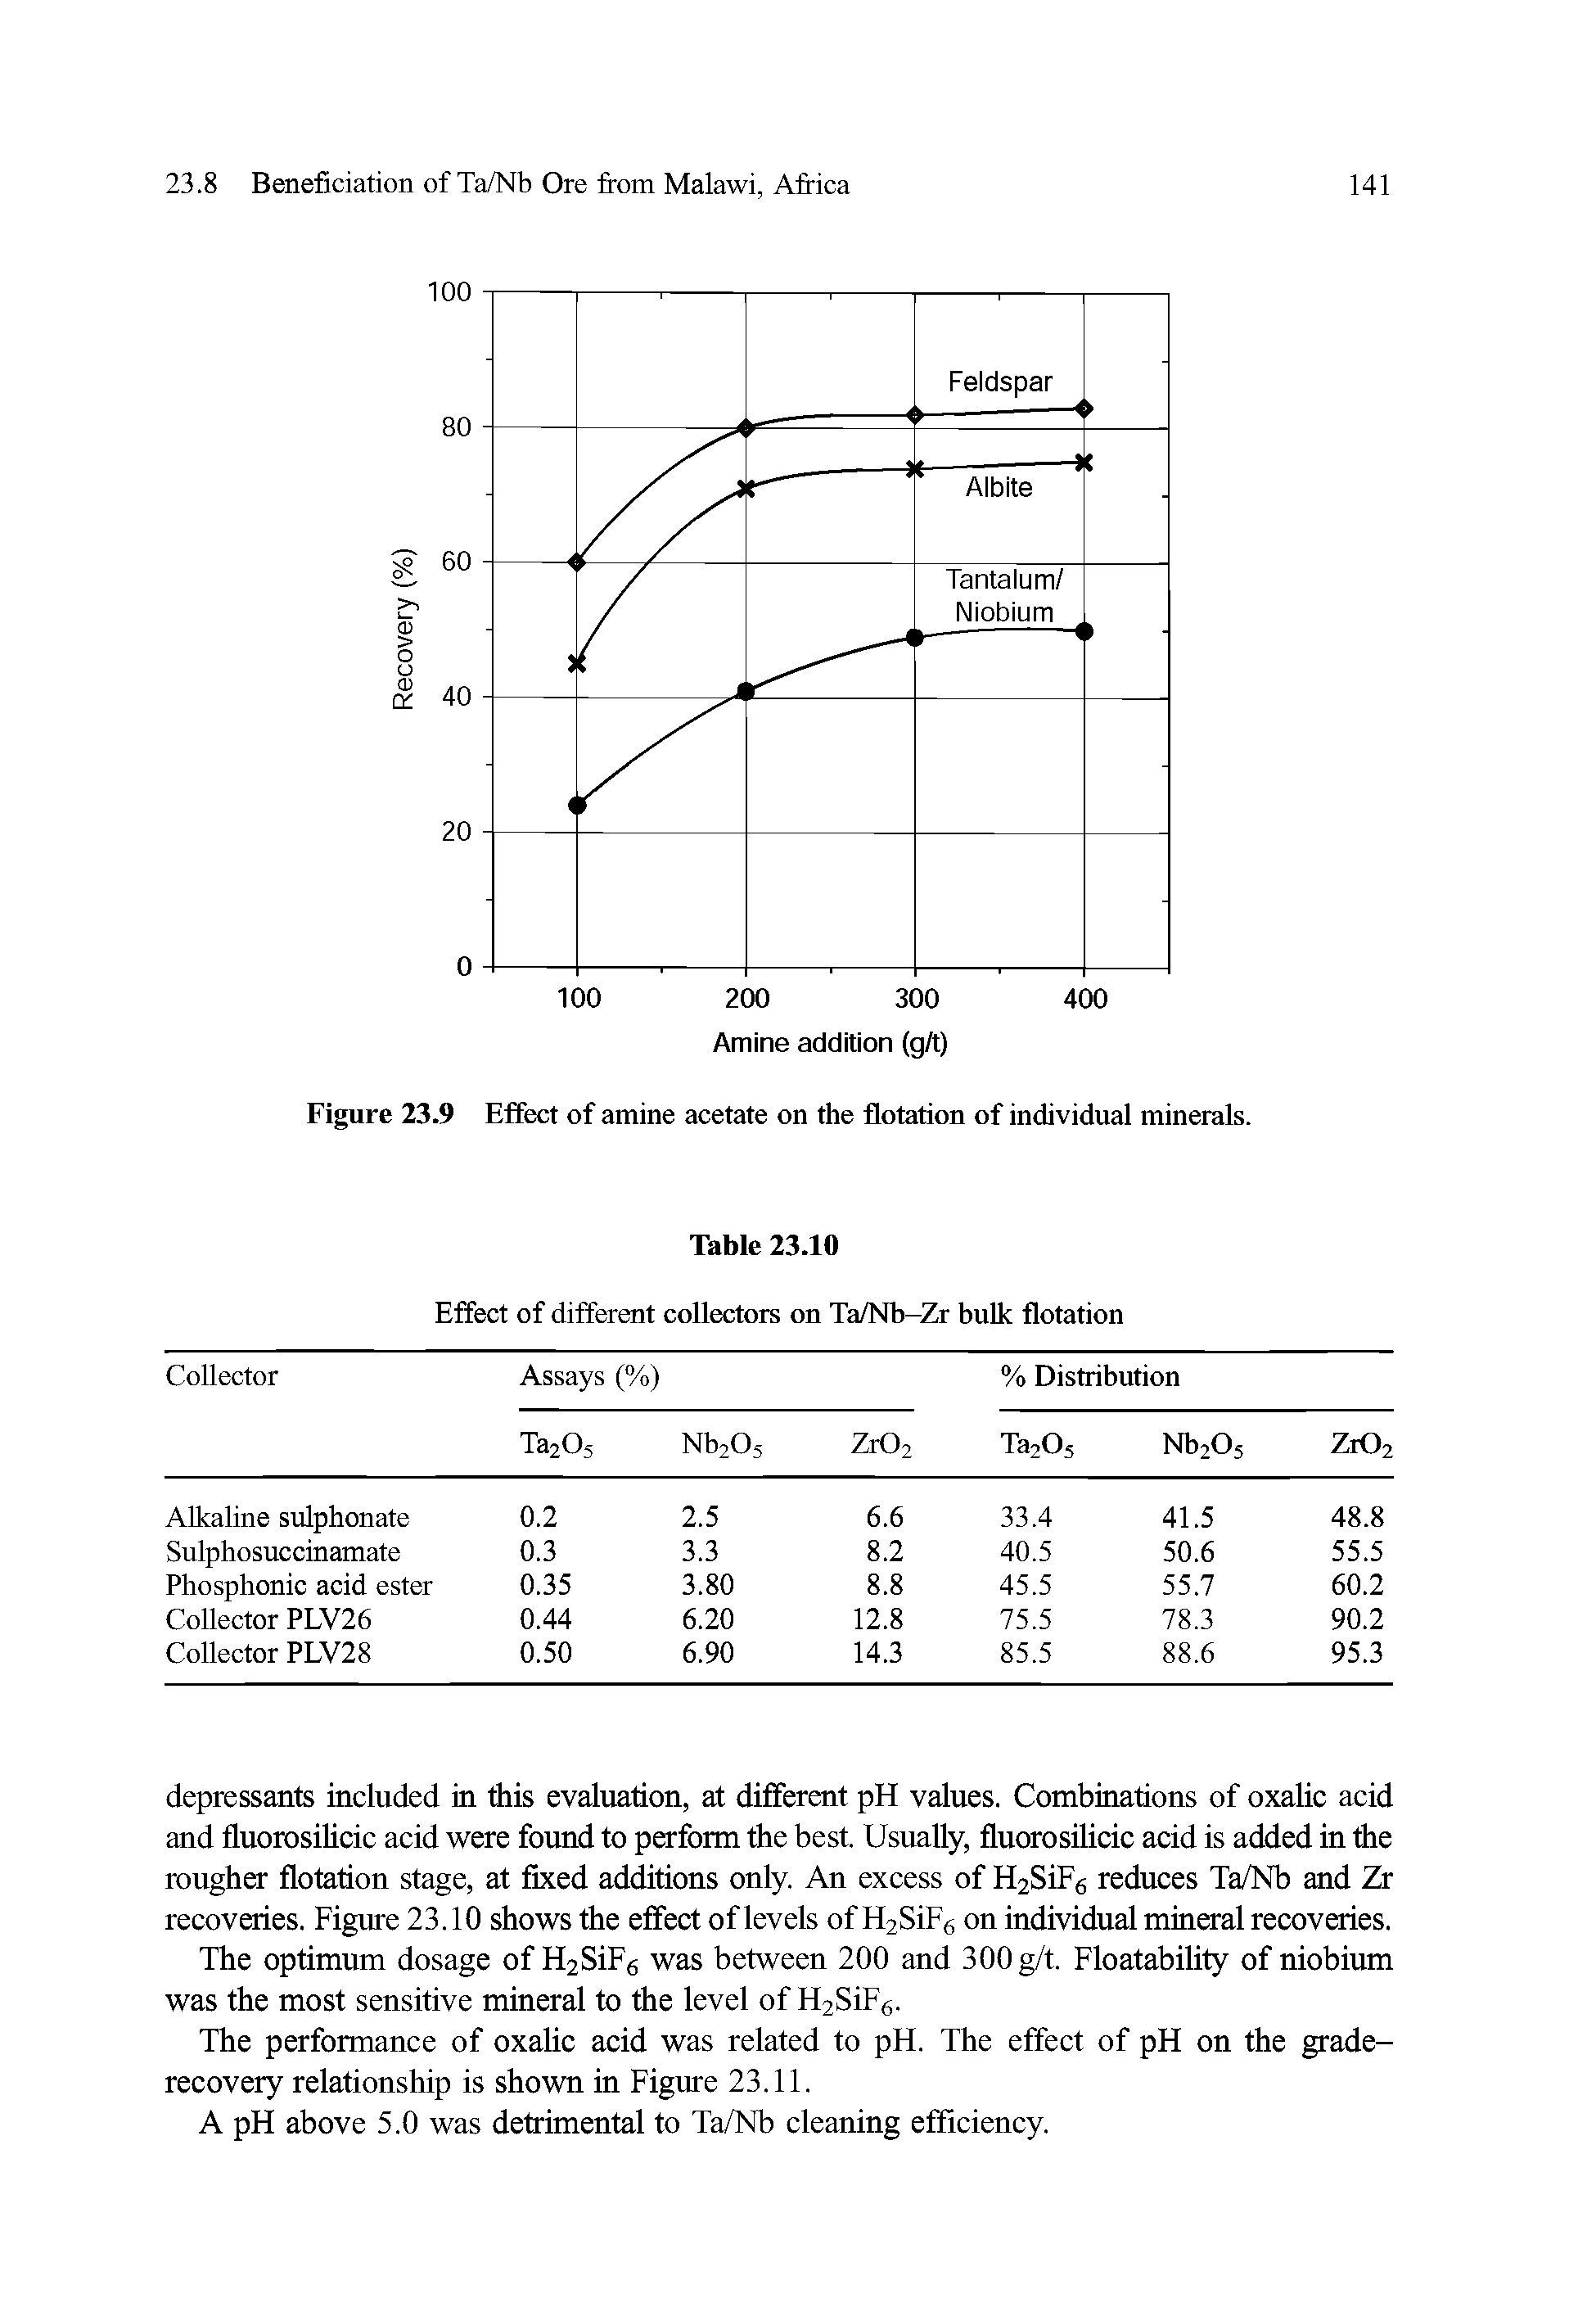 Figure 23.9 Effect of amine acetate on the flotation of individual minerals.